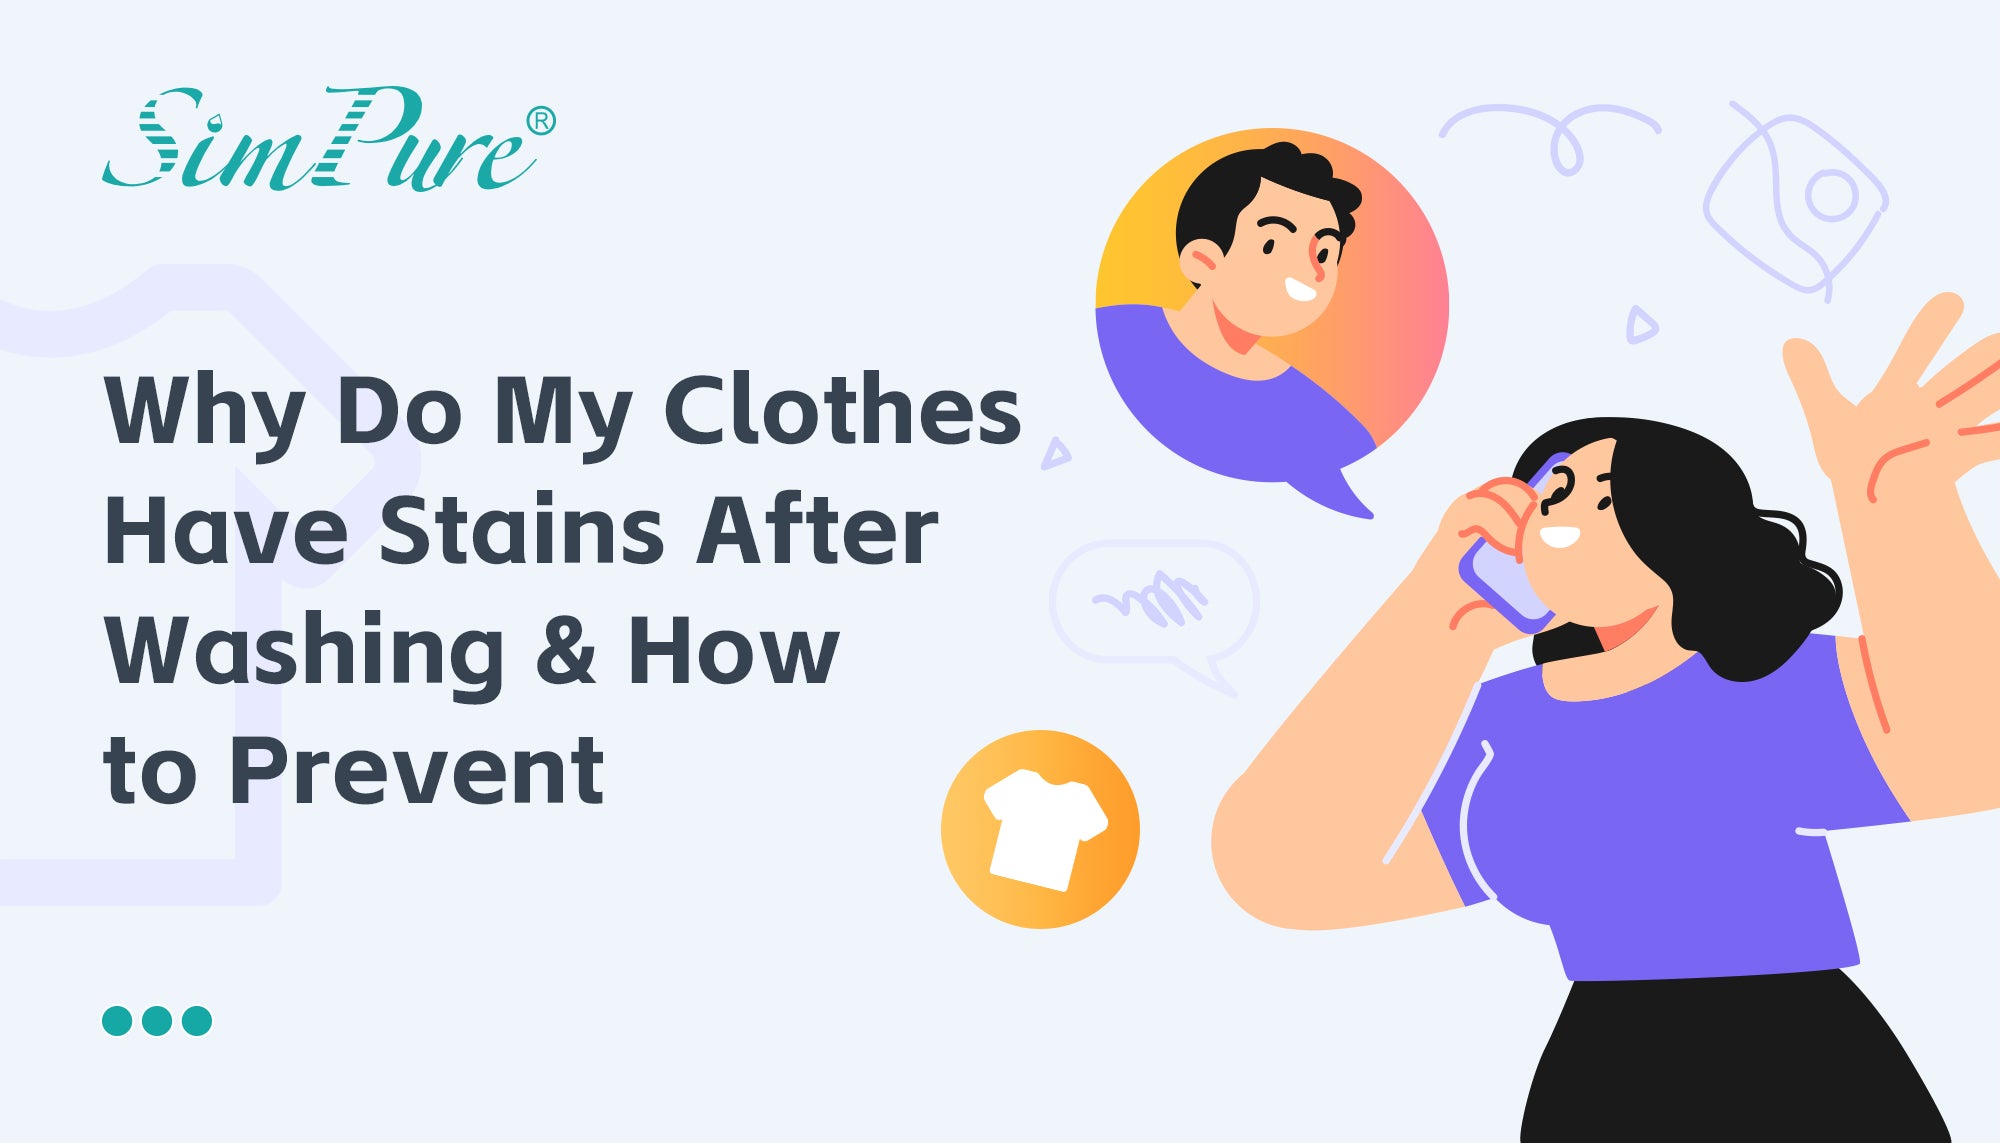 Why Do My Clothes Have Stains After Washing